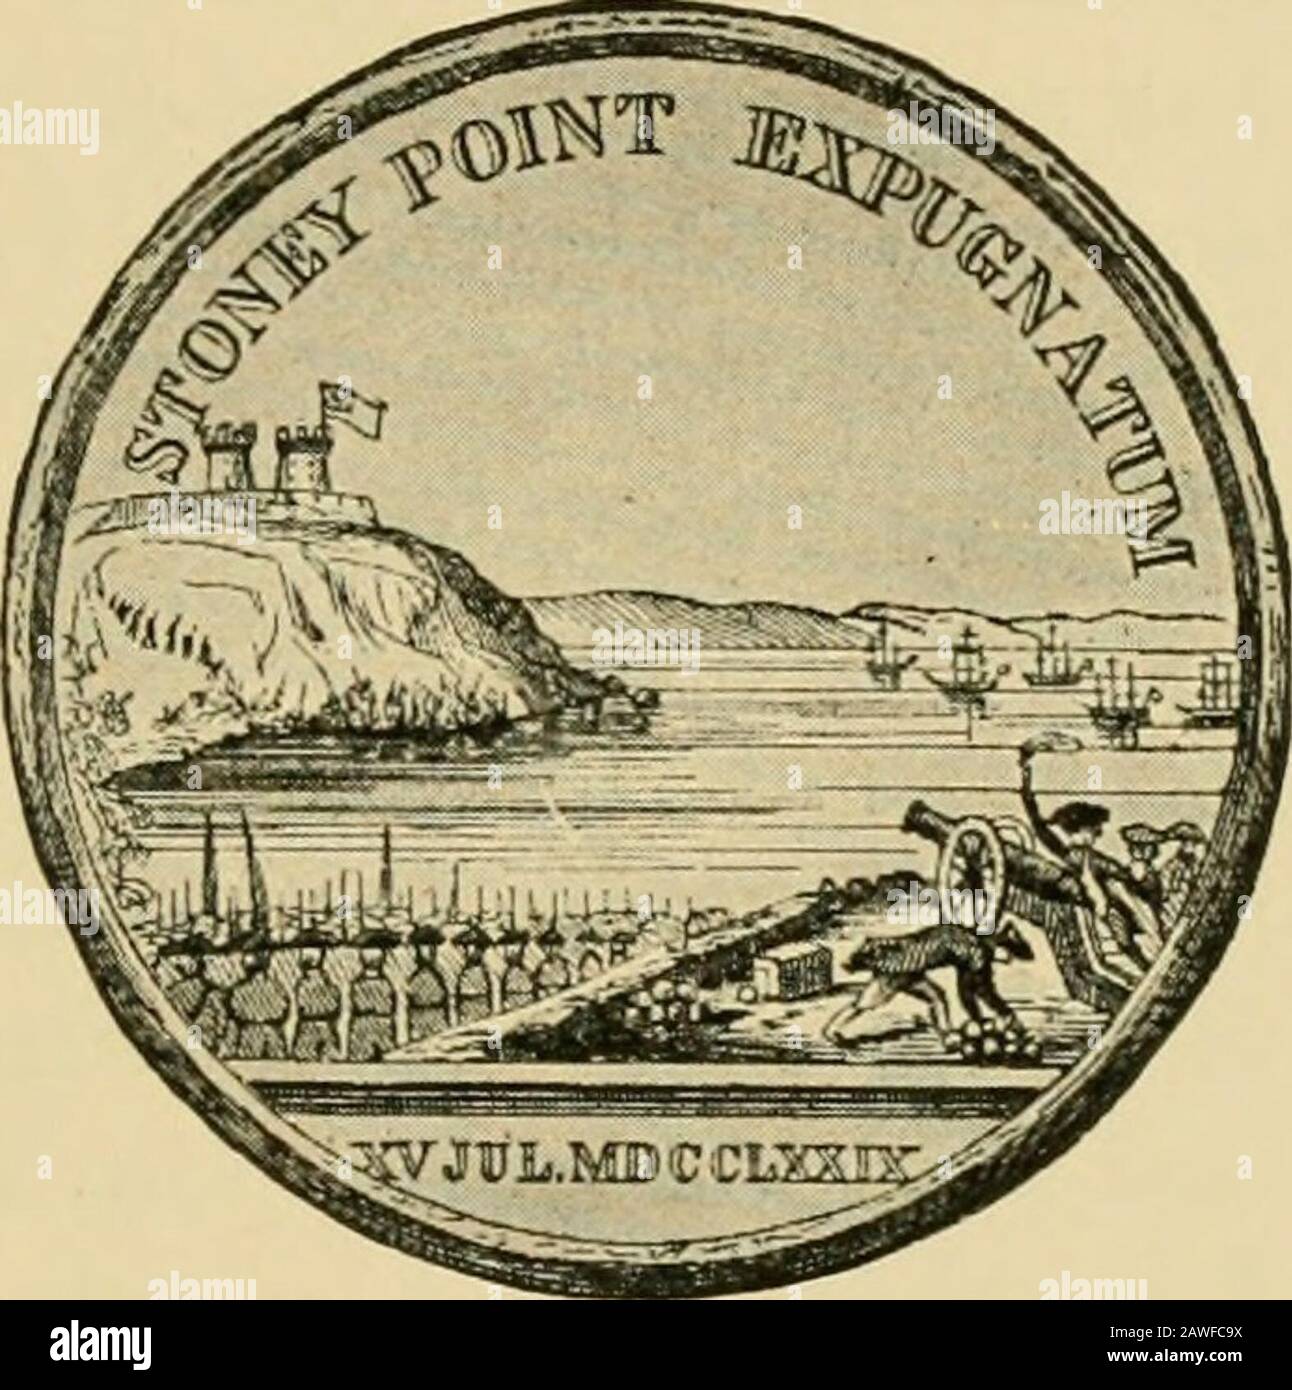 Essentials of United States history . The Medal Voted to General Anthony Wayne by Congress. Stony Point, Paulus Hook, and the Serapis. called because of his impulsive and energetic bravery — bya bold and decisive stroke captured Stony Point,a strongly fortified place on the Hudson, fortymiles north of New York. Major Henry Lee ofVirginia, Light Horse Harry,1 successfullystormed Paulus Hook, now Jersey City, at twooclock on the morning of August 19. Not a shotwas fired; only bayonets were used. Commodore PaulJones, in his ship the Bon Homme Richard, captured theSerapis in a daring and victoriou Stock Photo